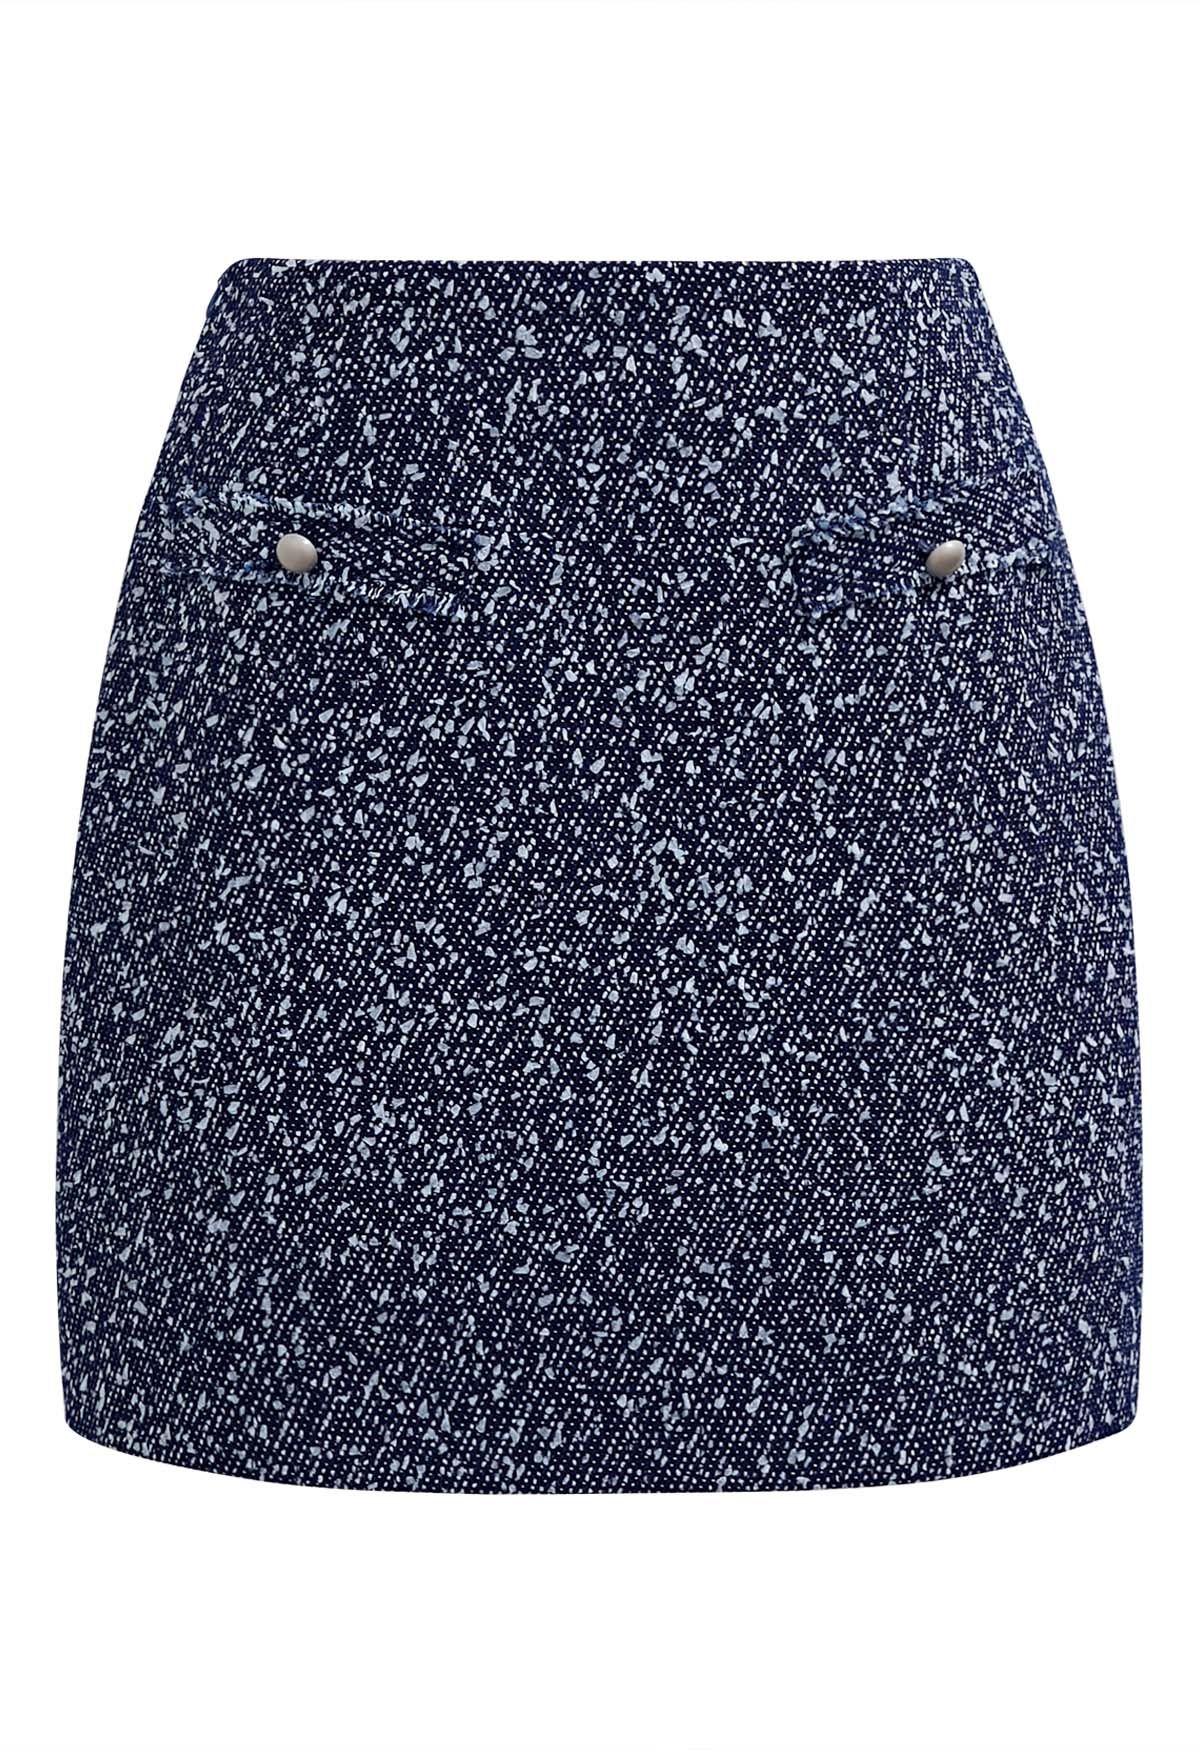 Mix-Color Buttoned Tweed Mini Skirt in Navy